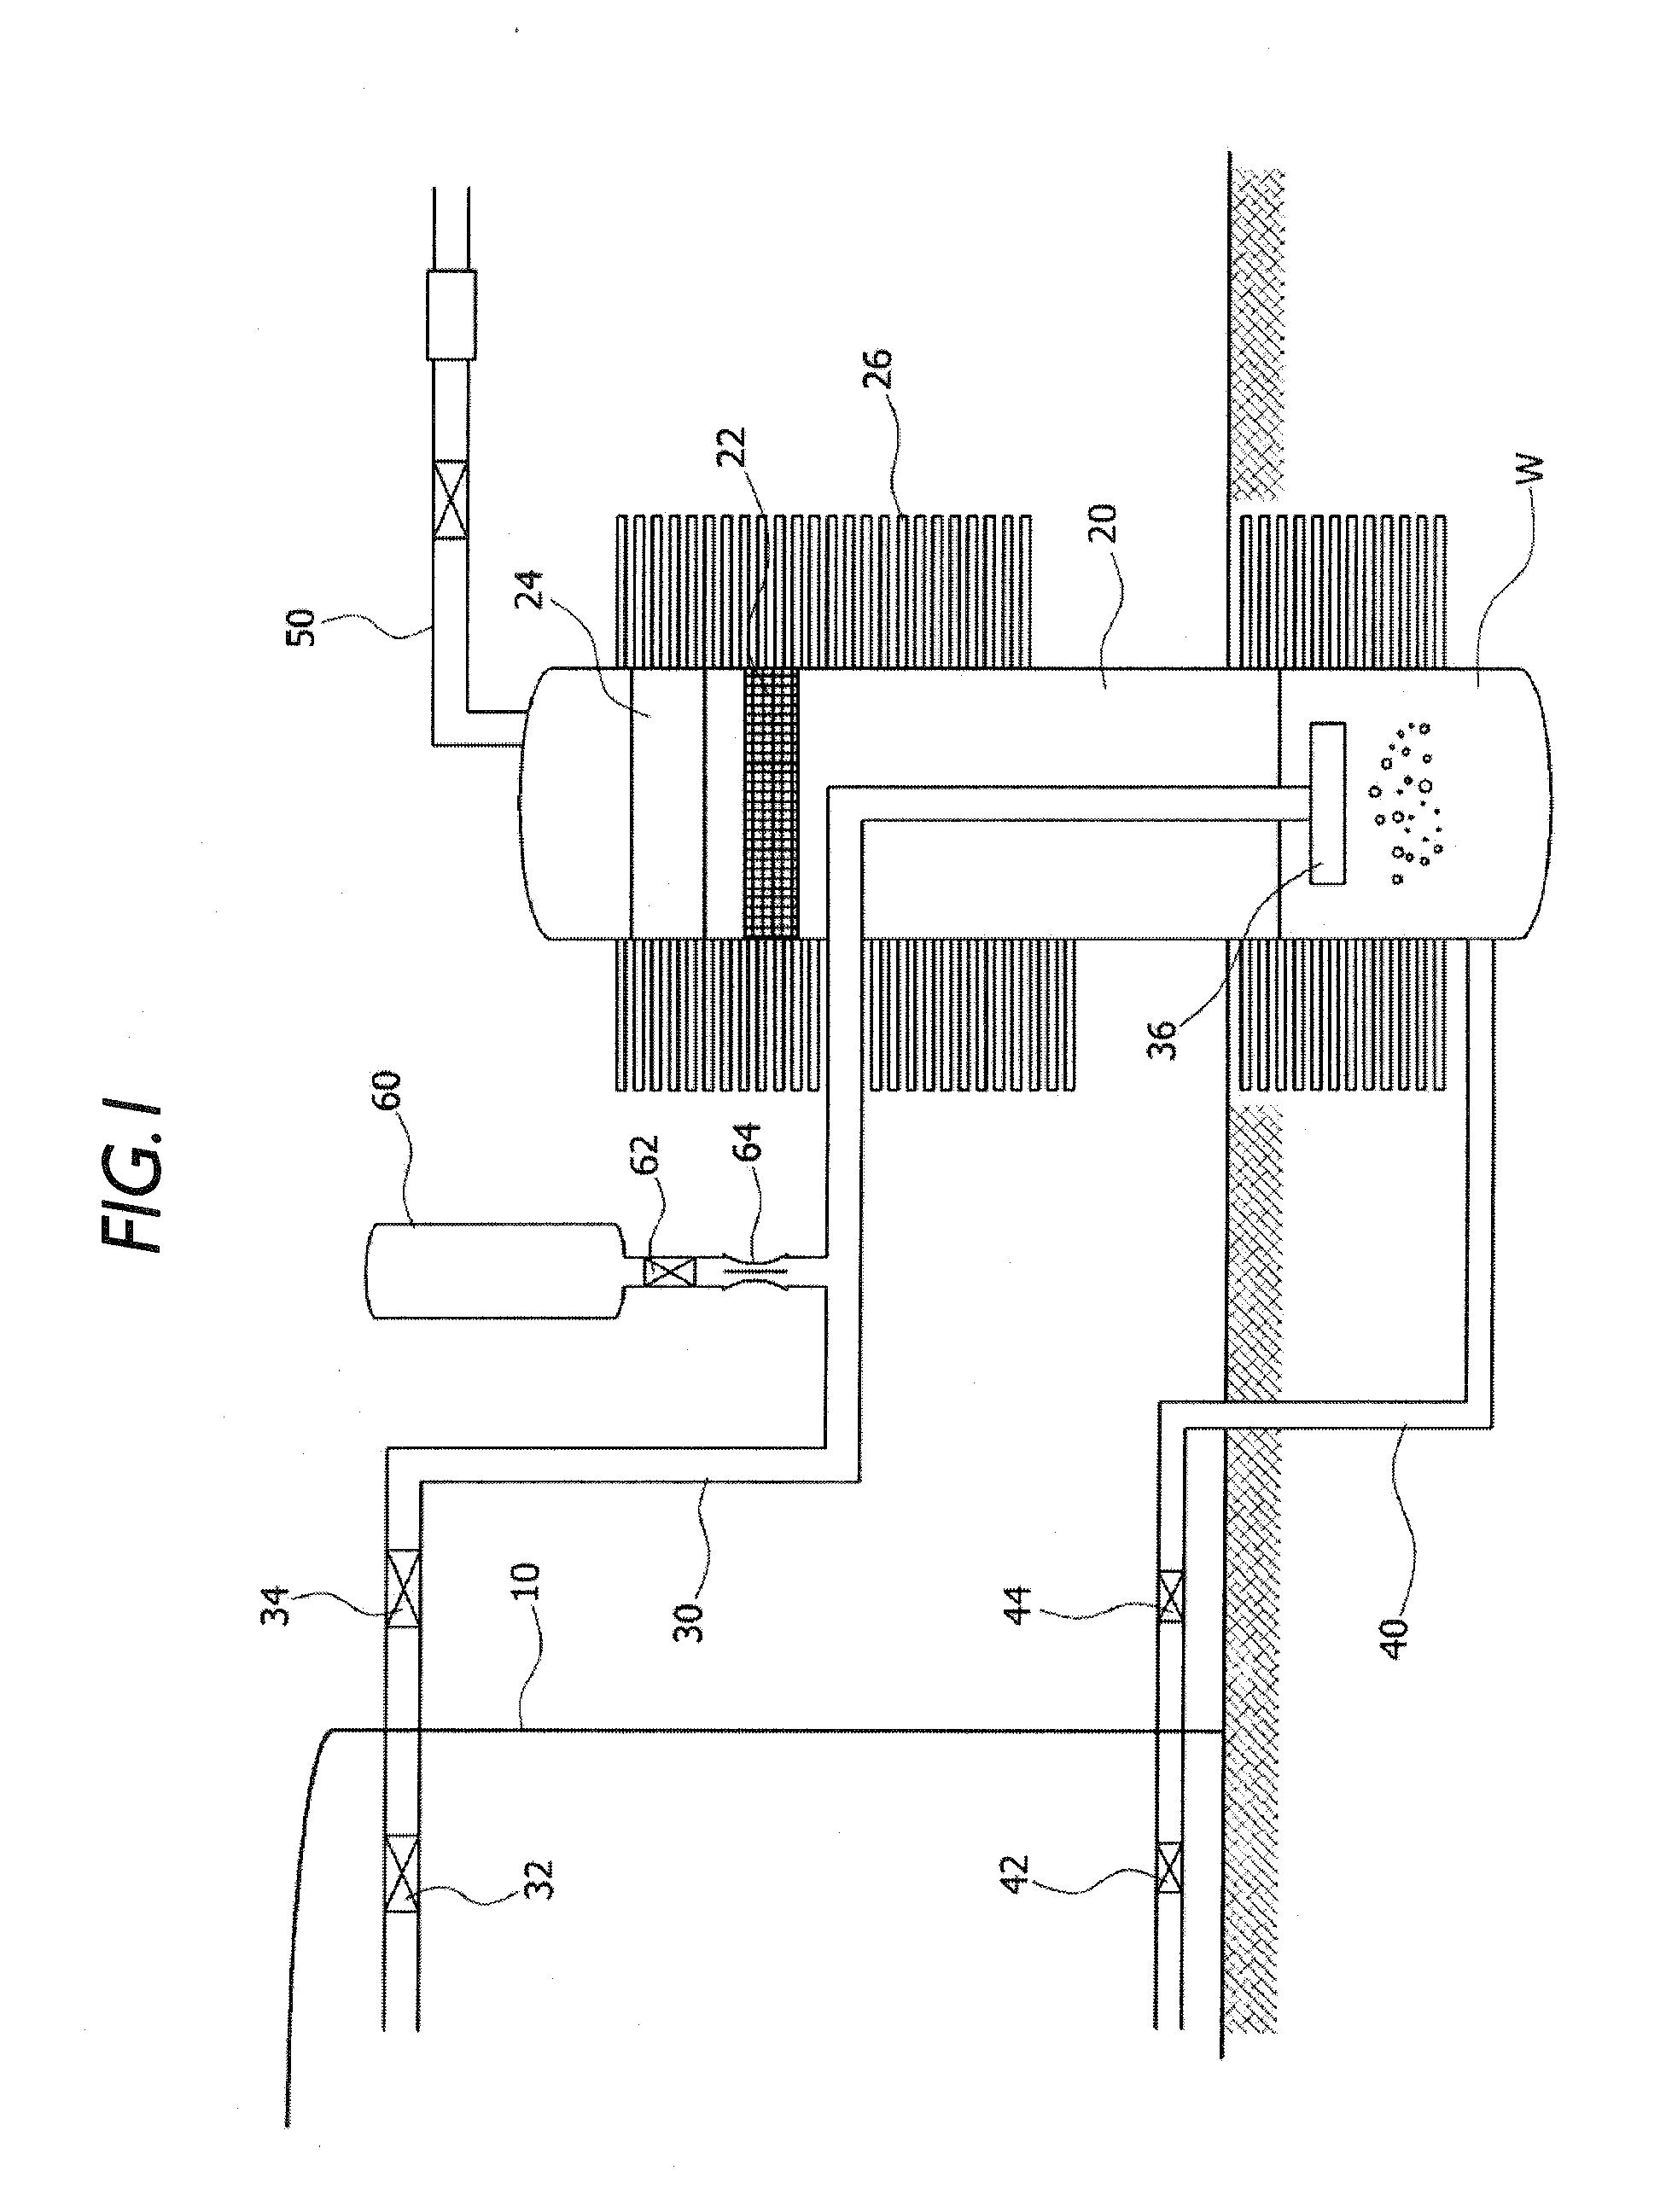 Cooling system of nuclear reactor containment structure